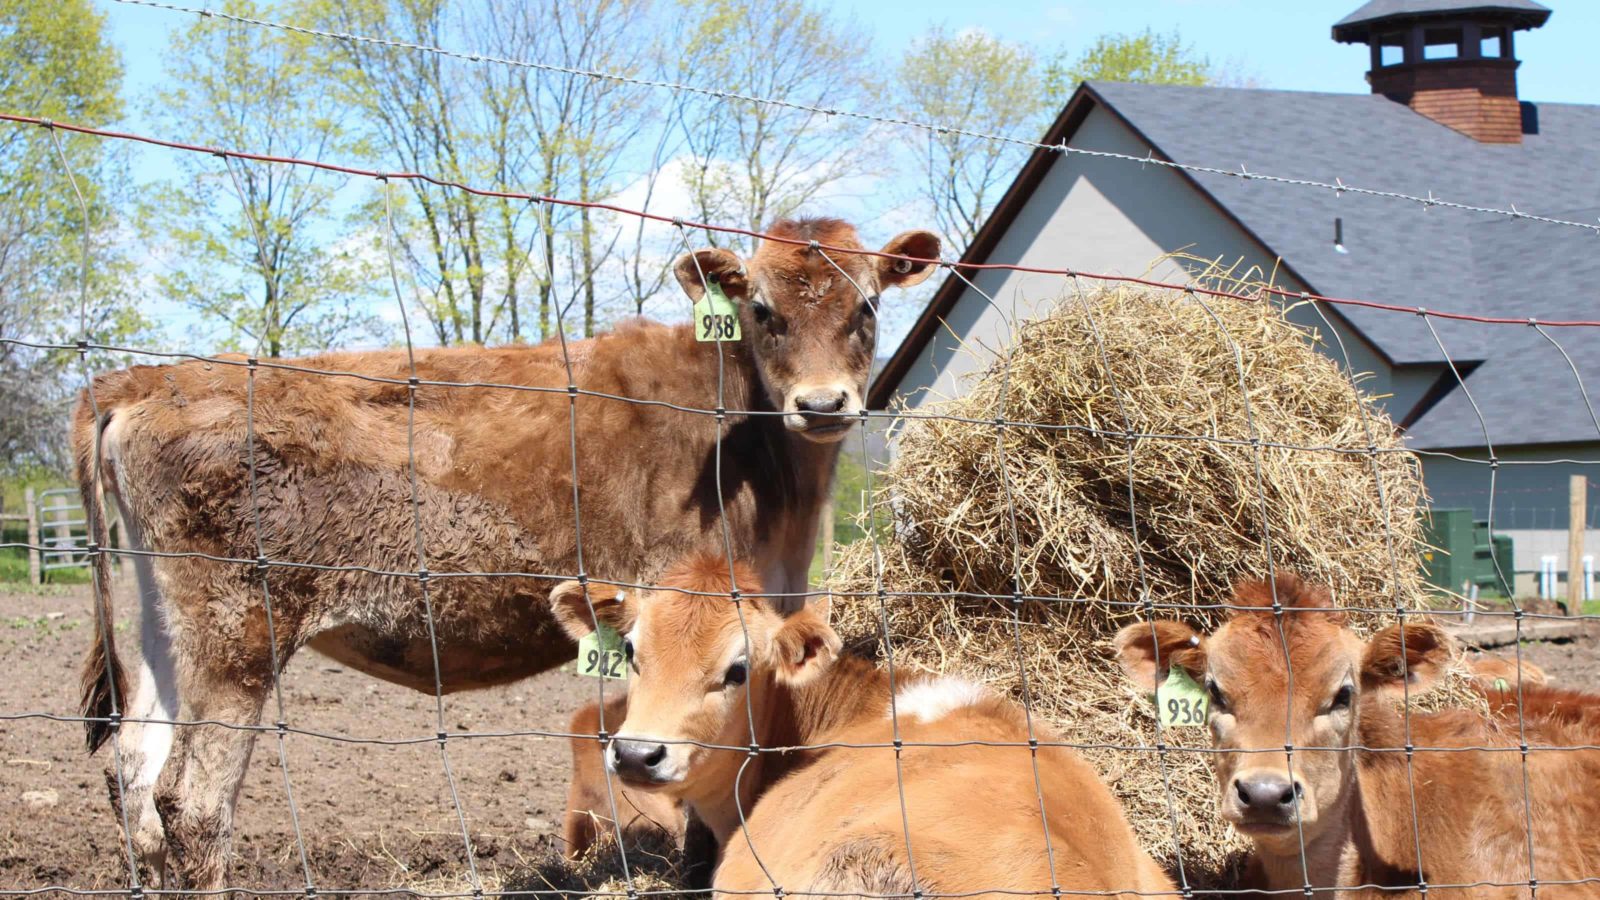 Jersey cows bask on a sunny day at High Lawn Farm in Lee.